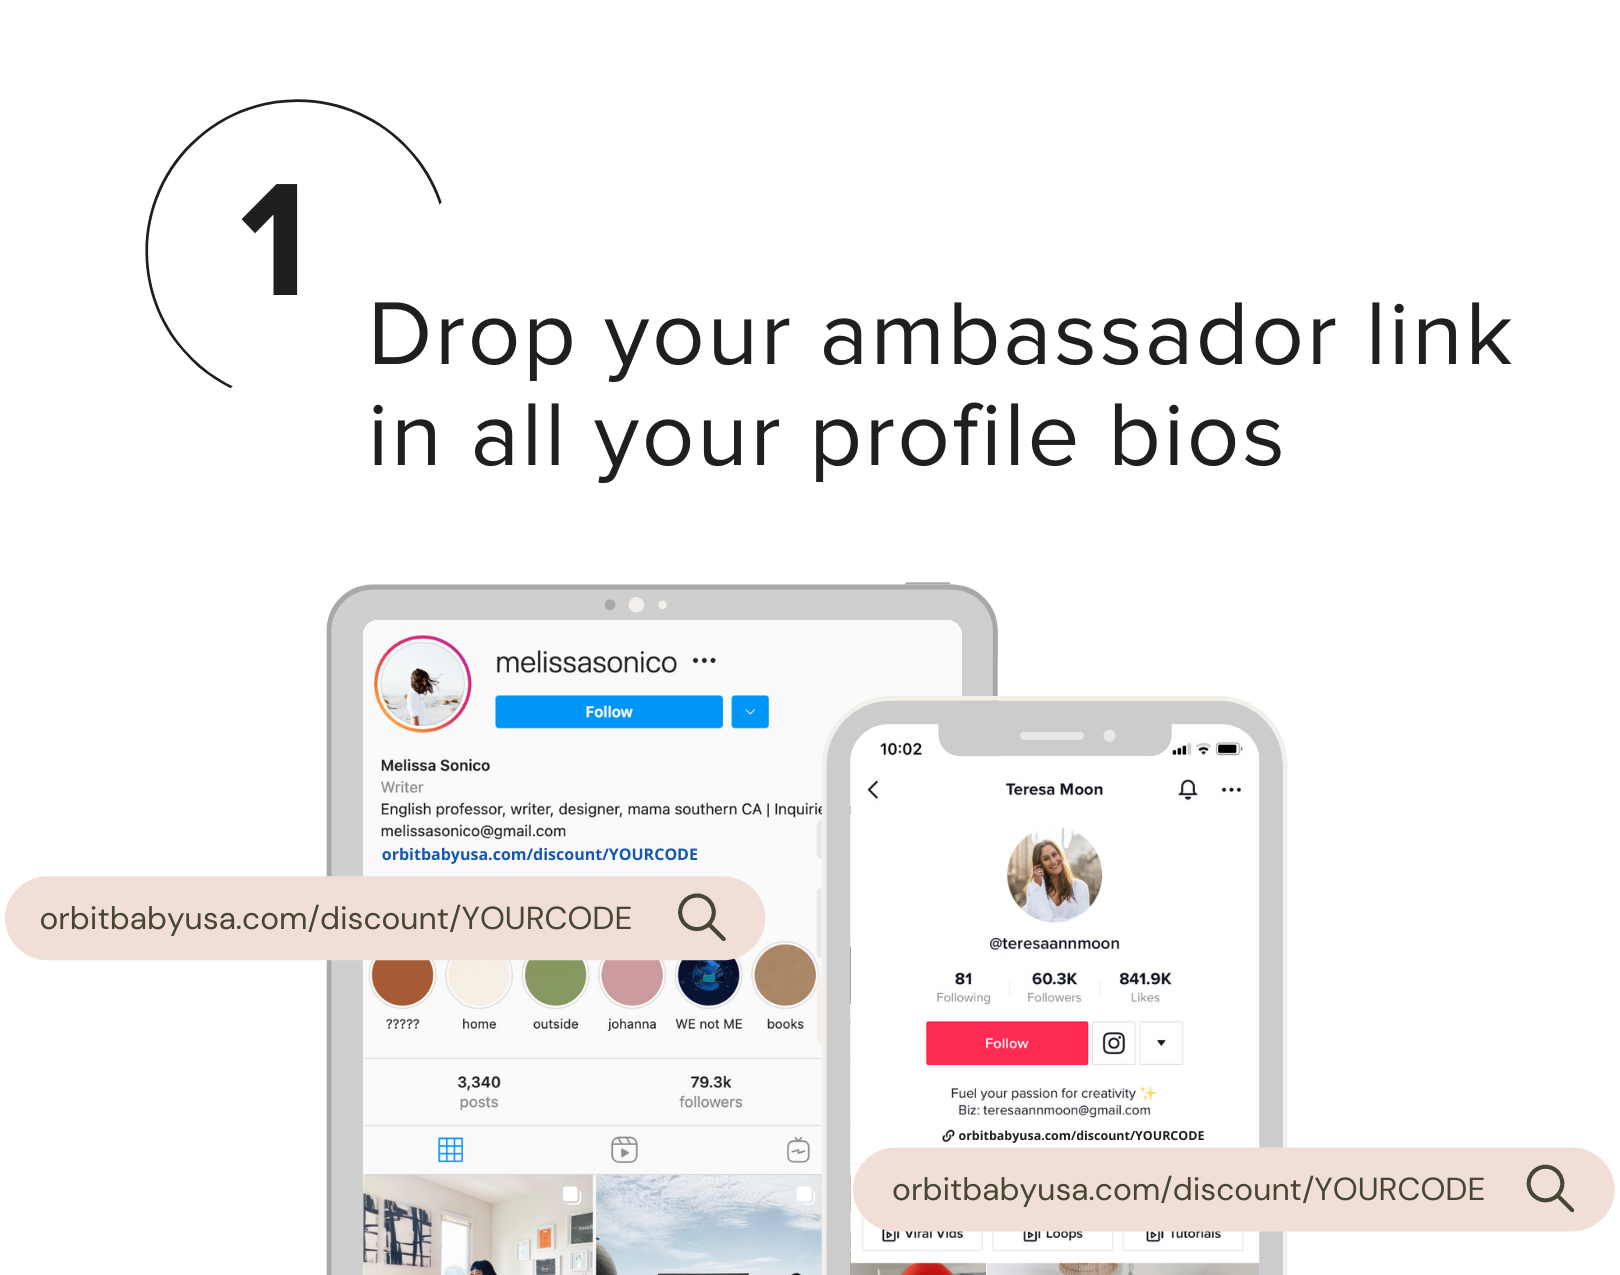 Drop your ambassador link in all your profile bios